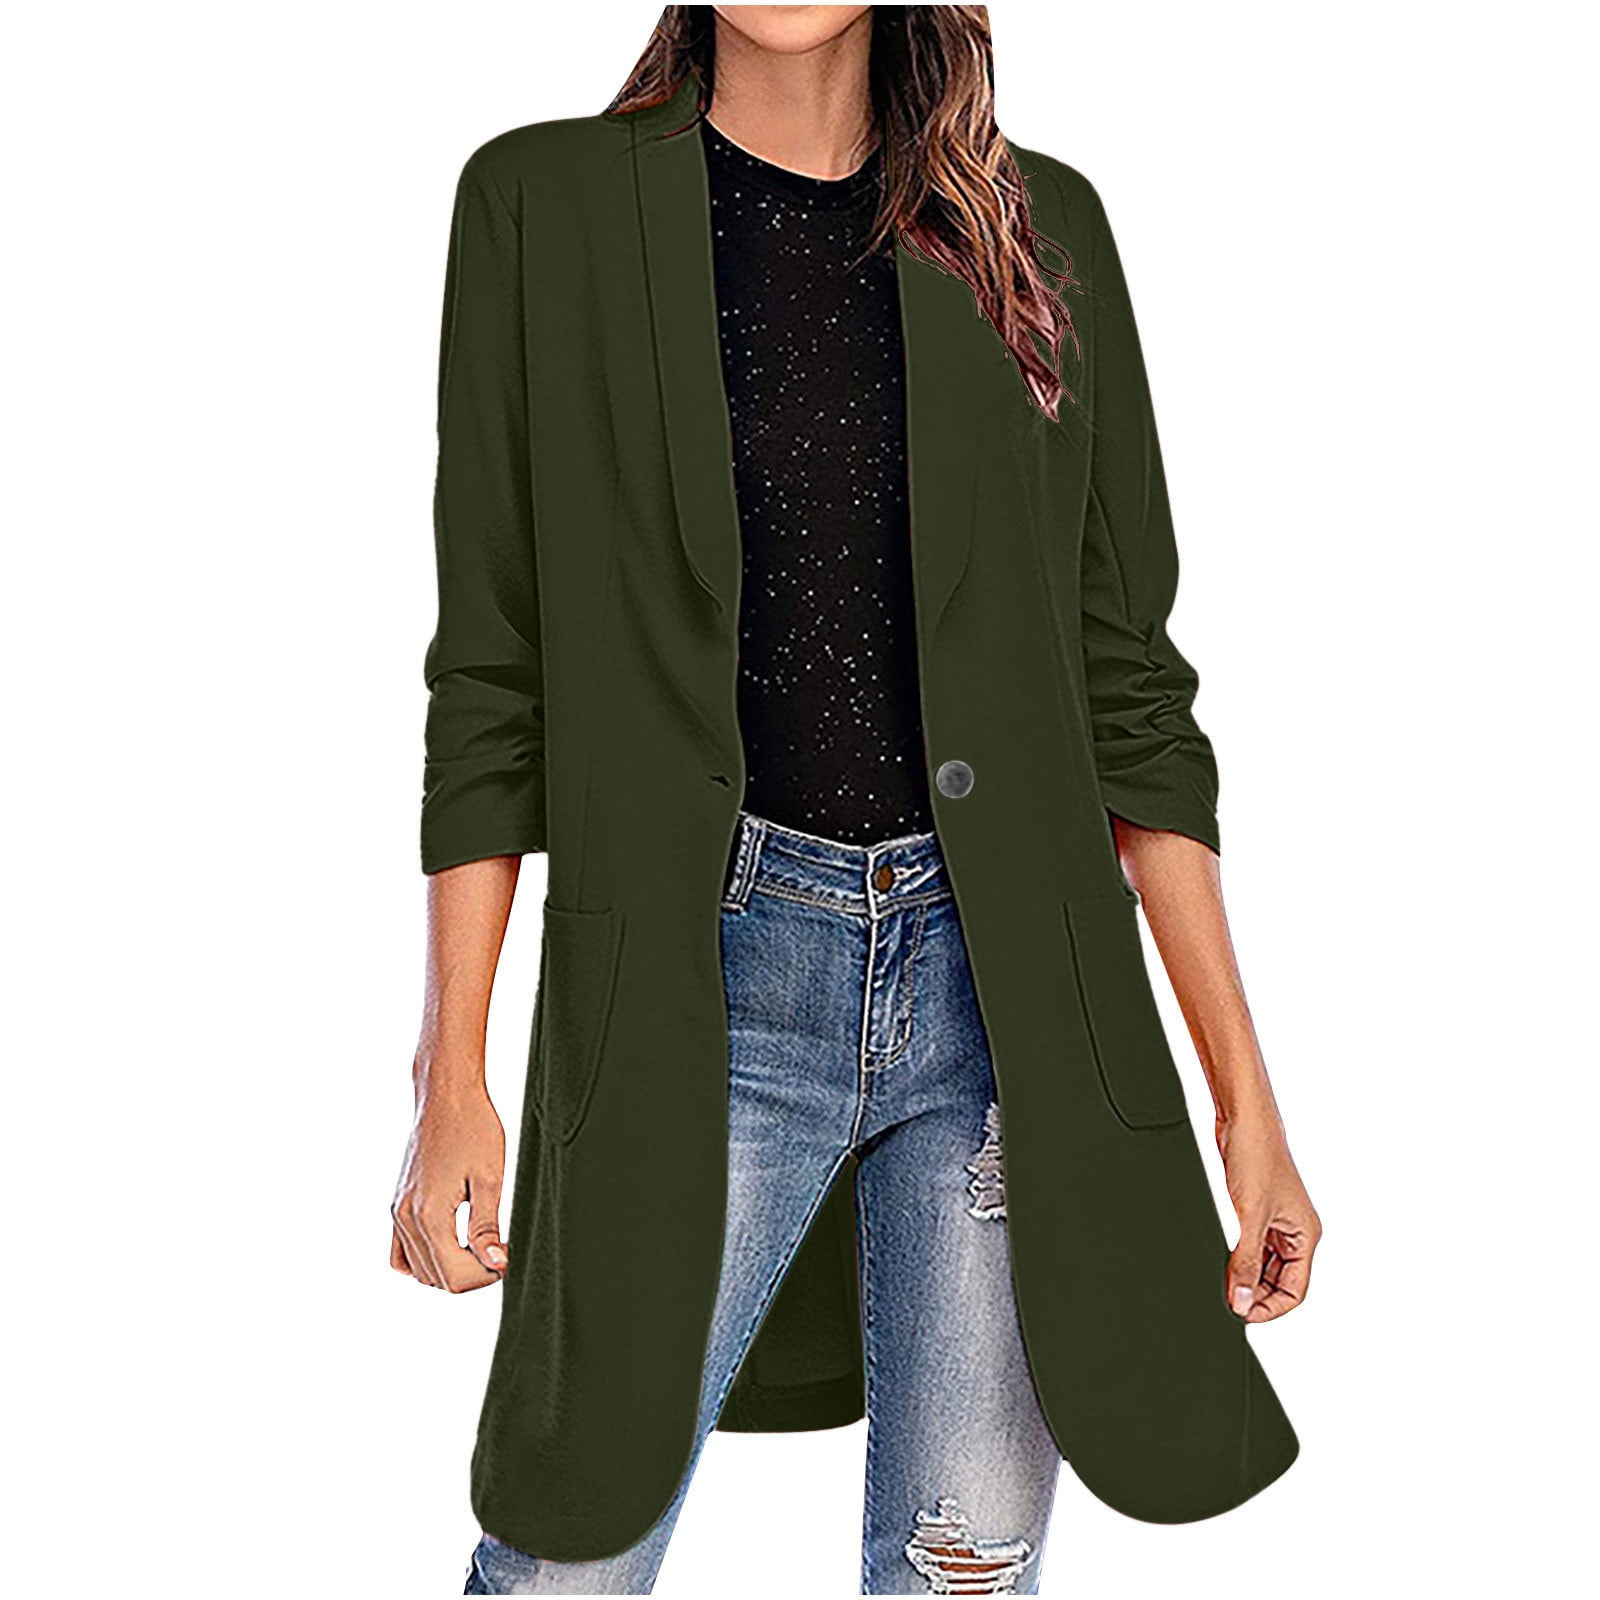 Olyvenn Women's Casual Blazer Jackets Suit Solid Colored Long